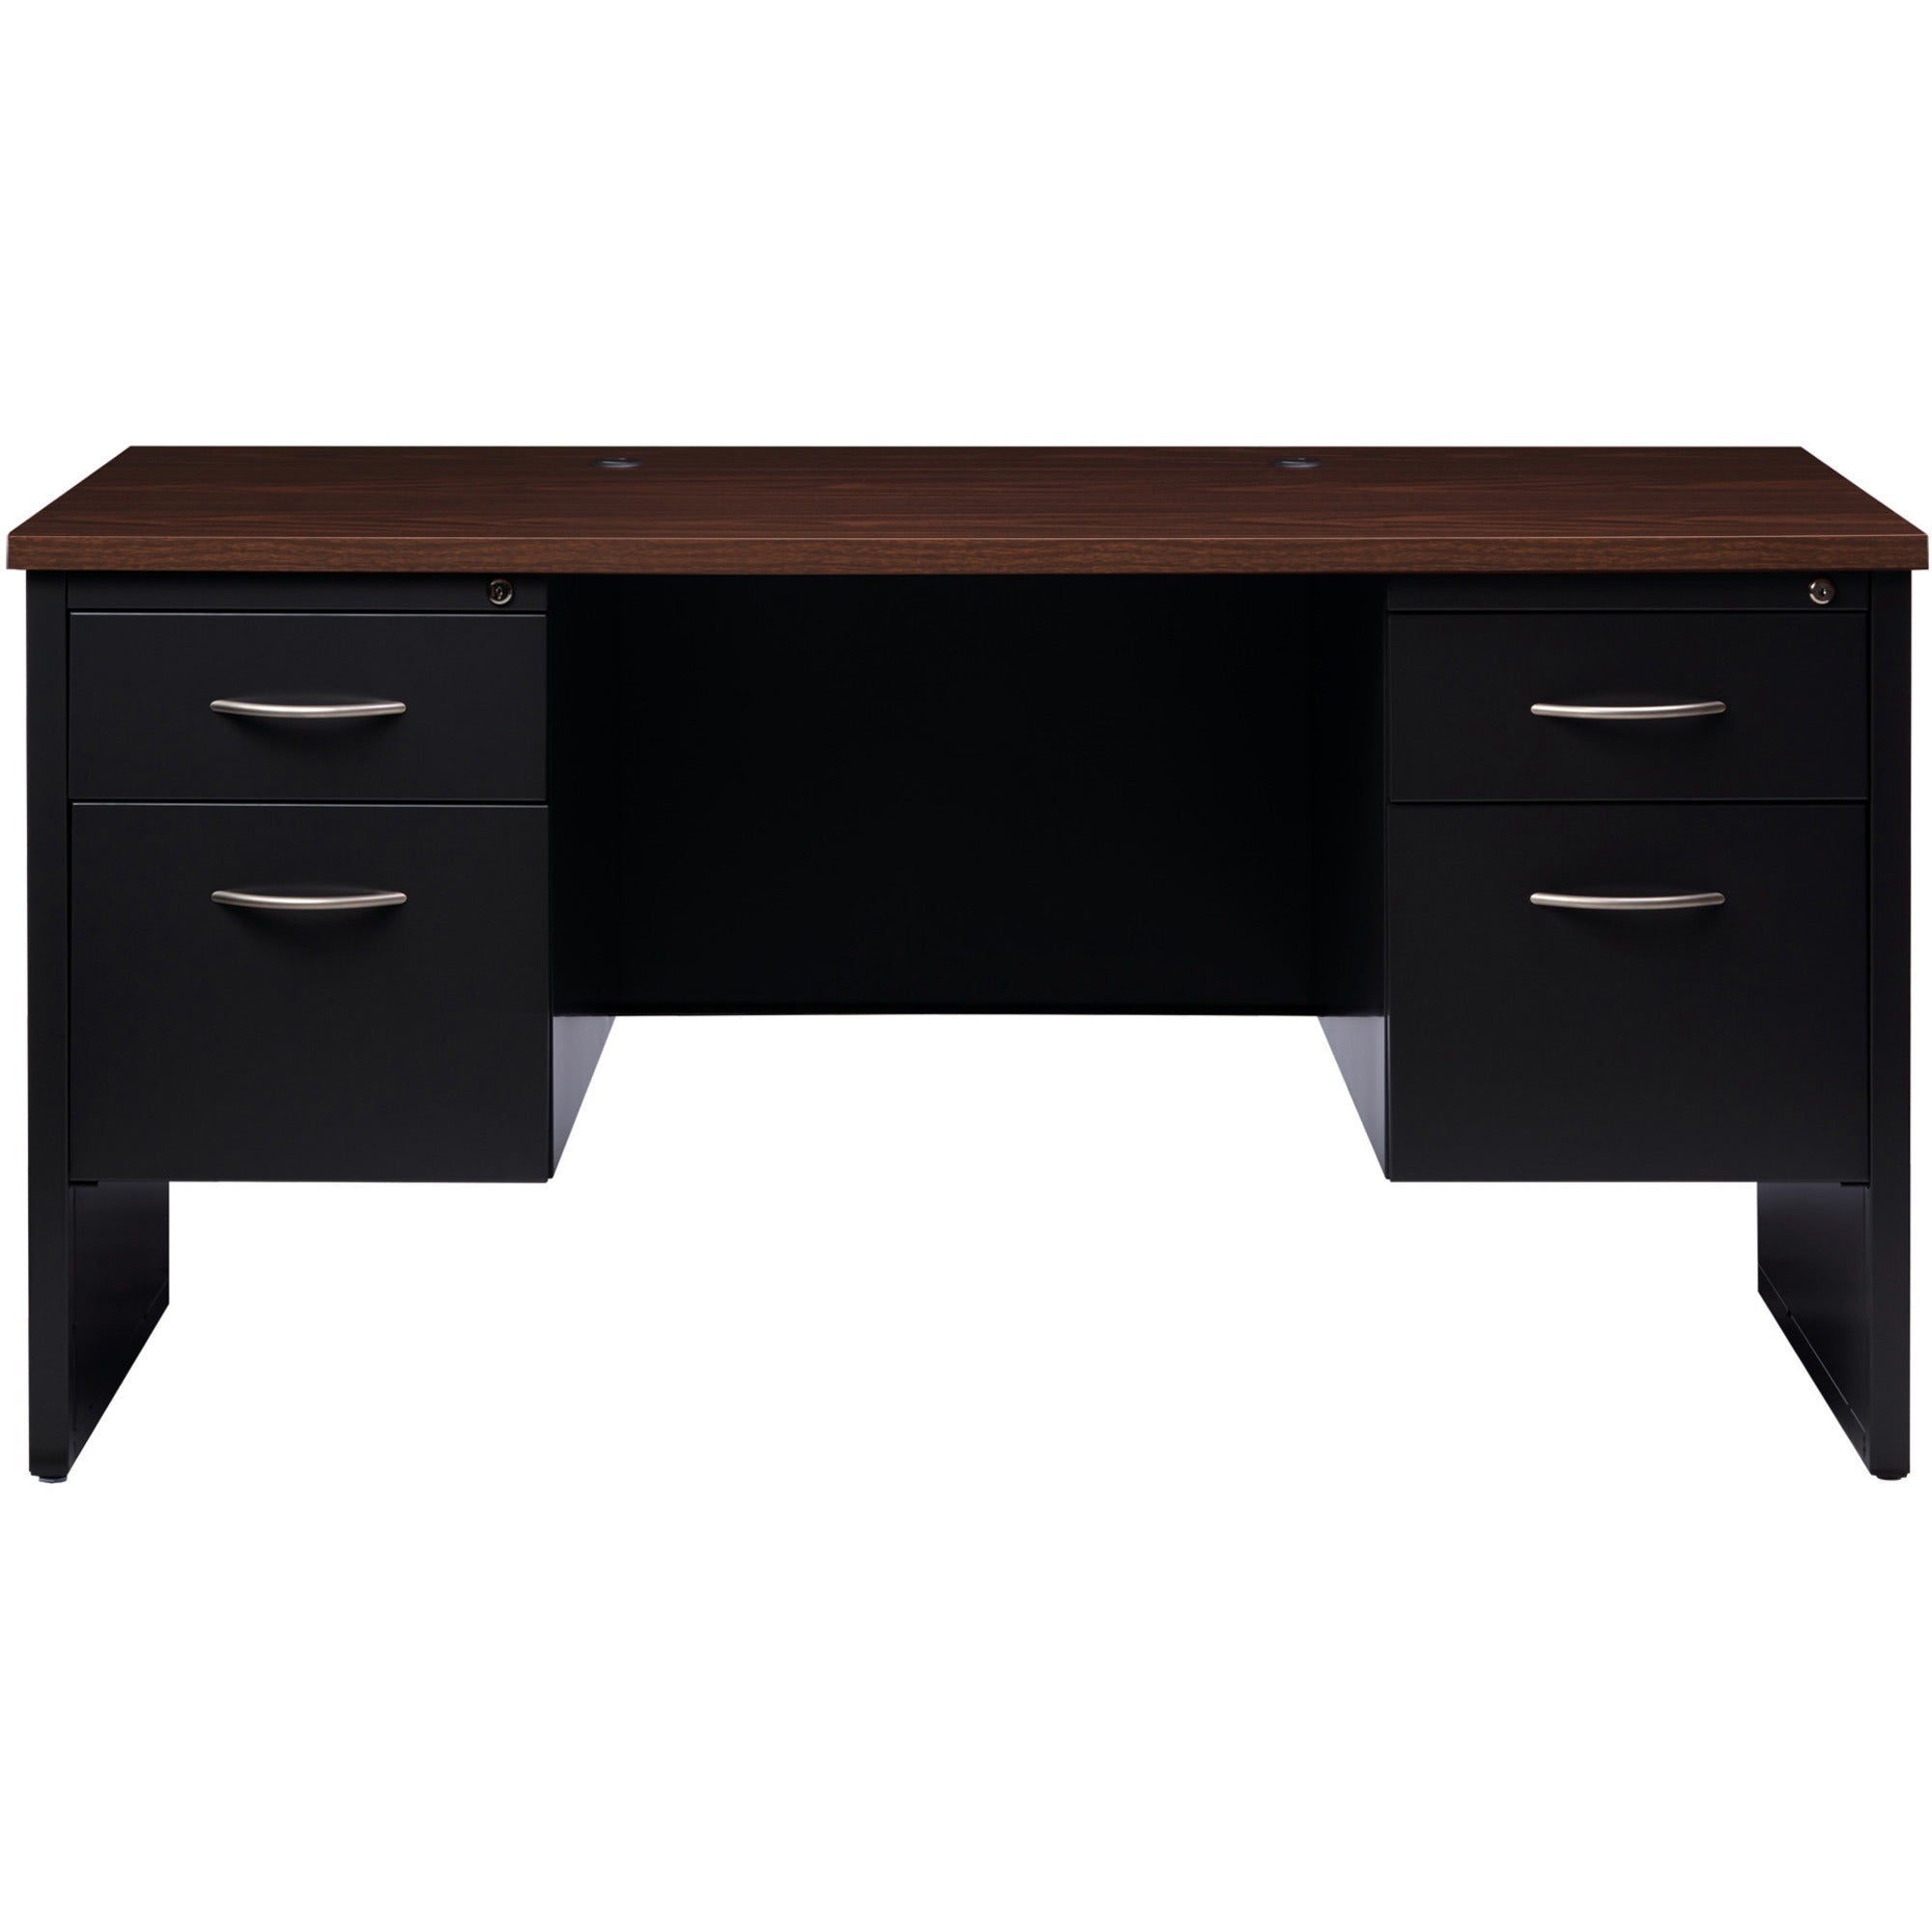 Lorell Fortress Modular Series Double-pedestal Credenza - 60" x 24" , 1.1" Top - 2 x Box, File Drawer(s) - Double Pedestal - Material: Steel - Finish: Walnut Laminate, Black - Scratch Resistant, Stain Resistant, Ball-bearing Suspension, Grommet, Hand - 